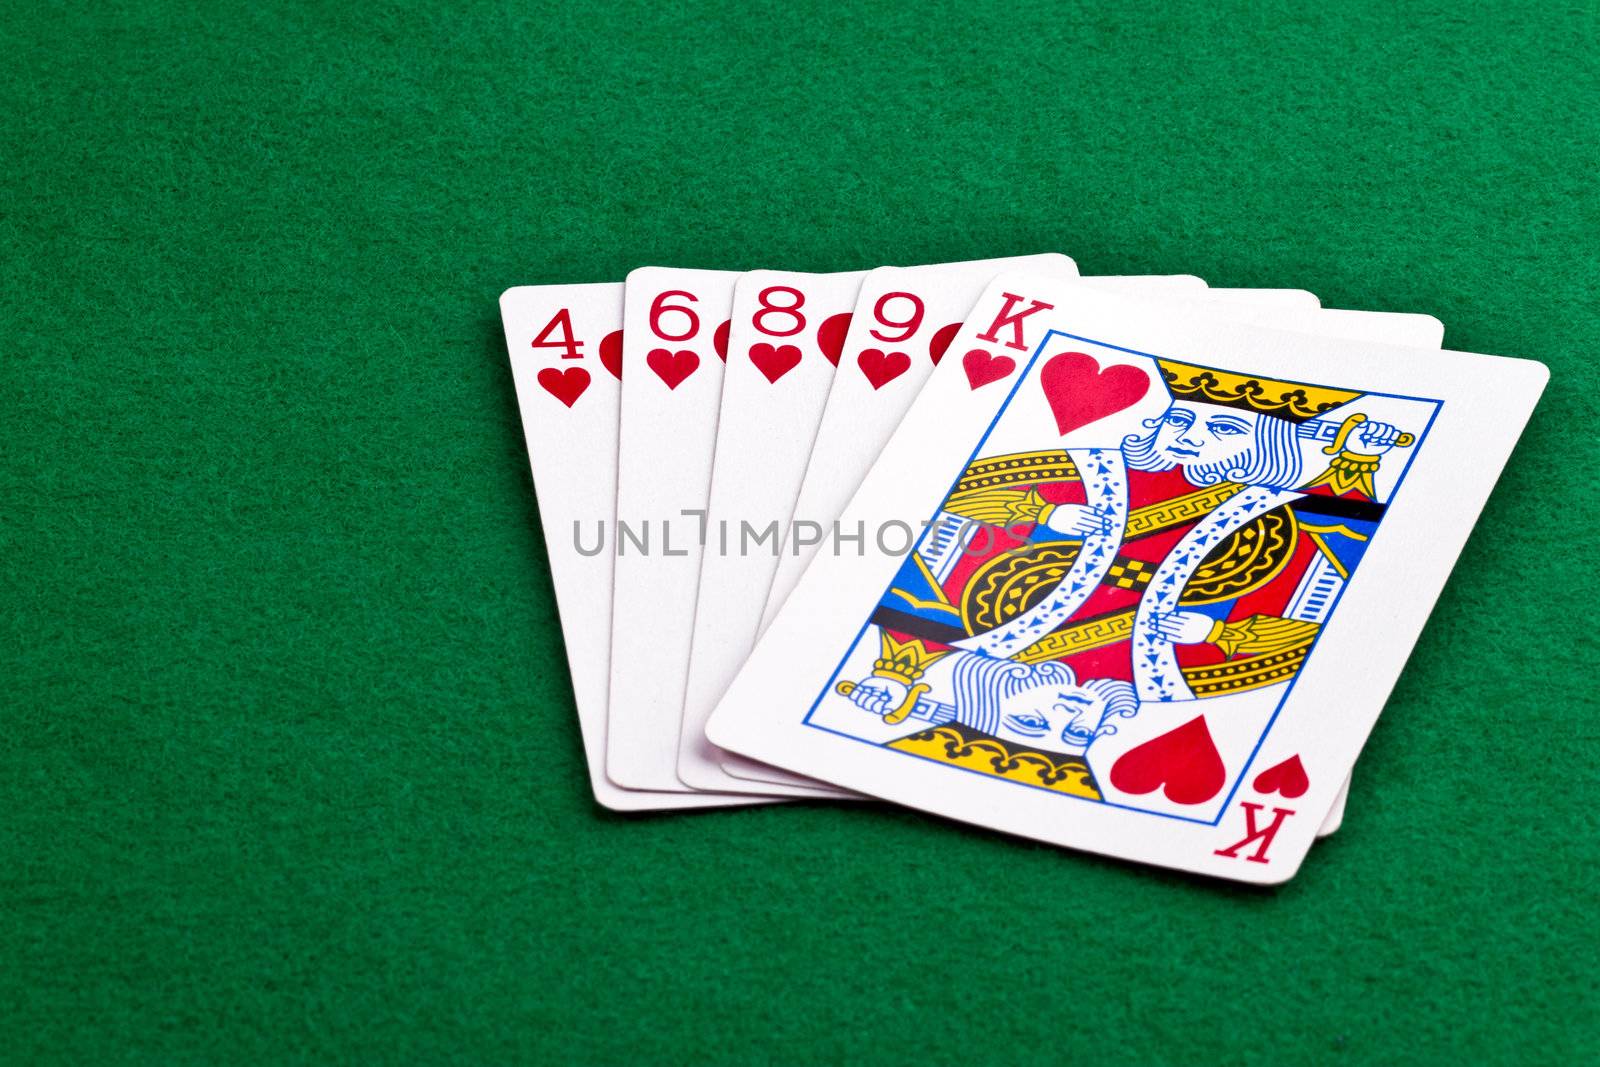 Poker hand with a flush of hearts on green felt